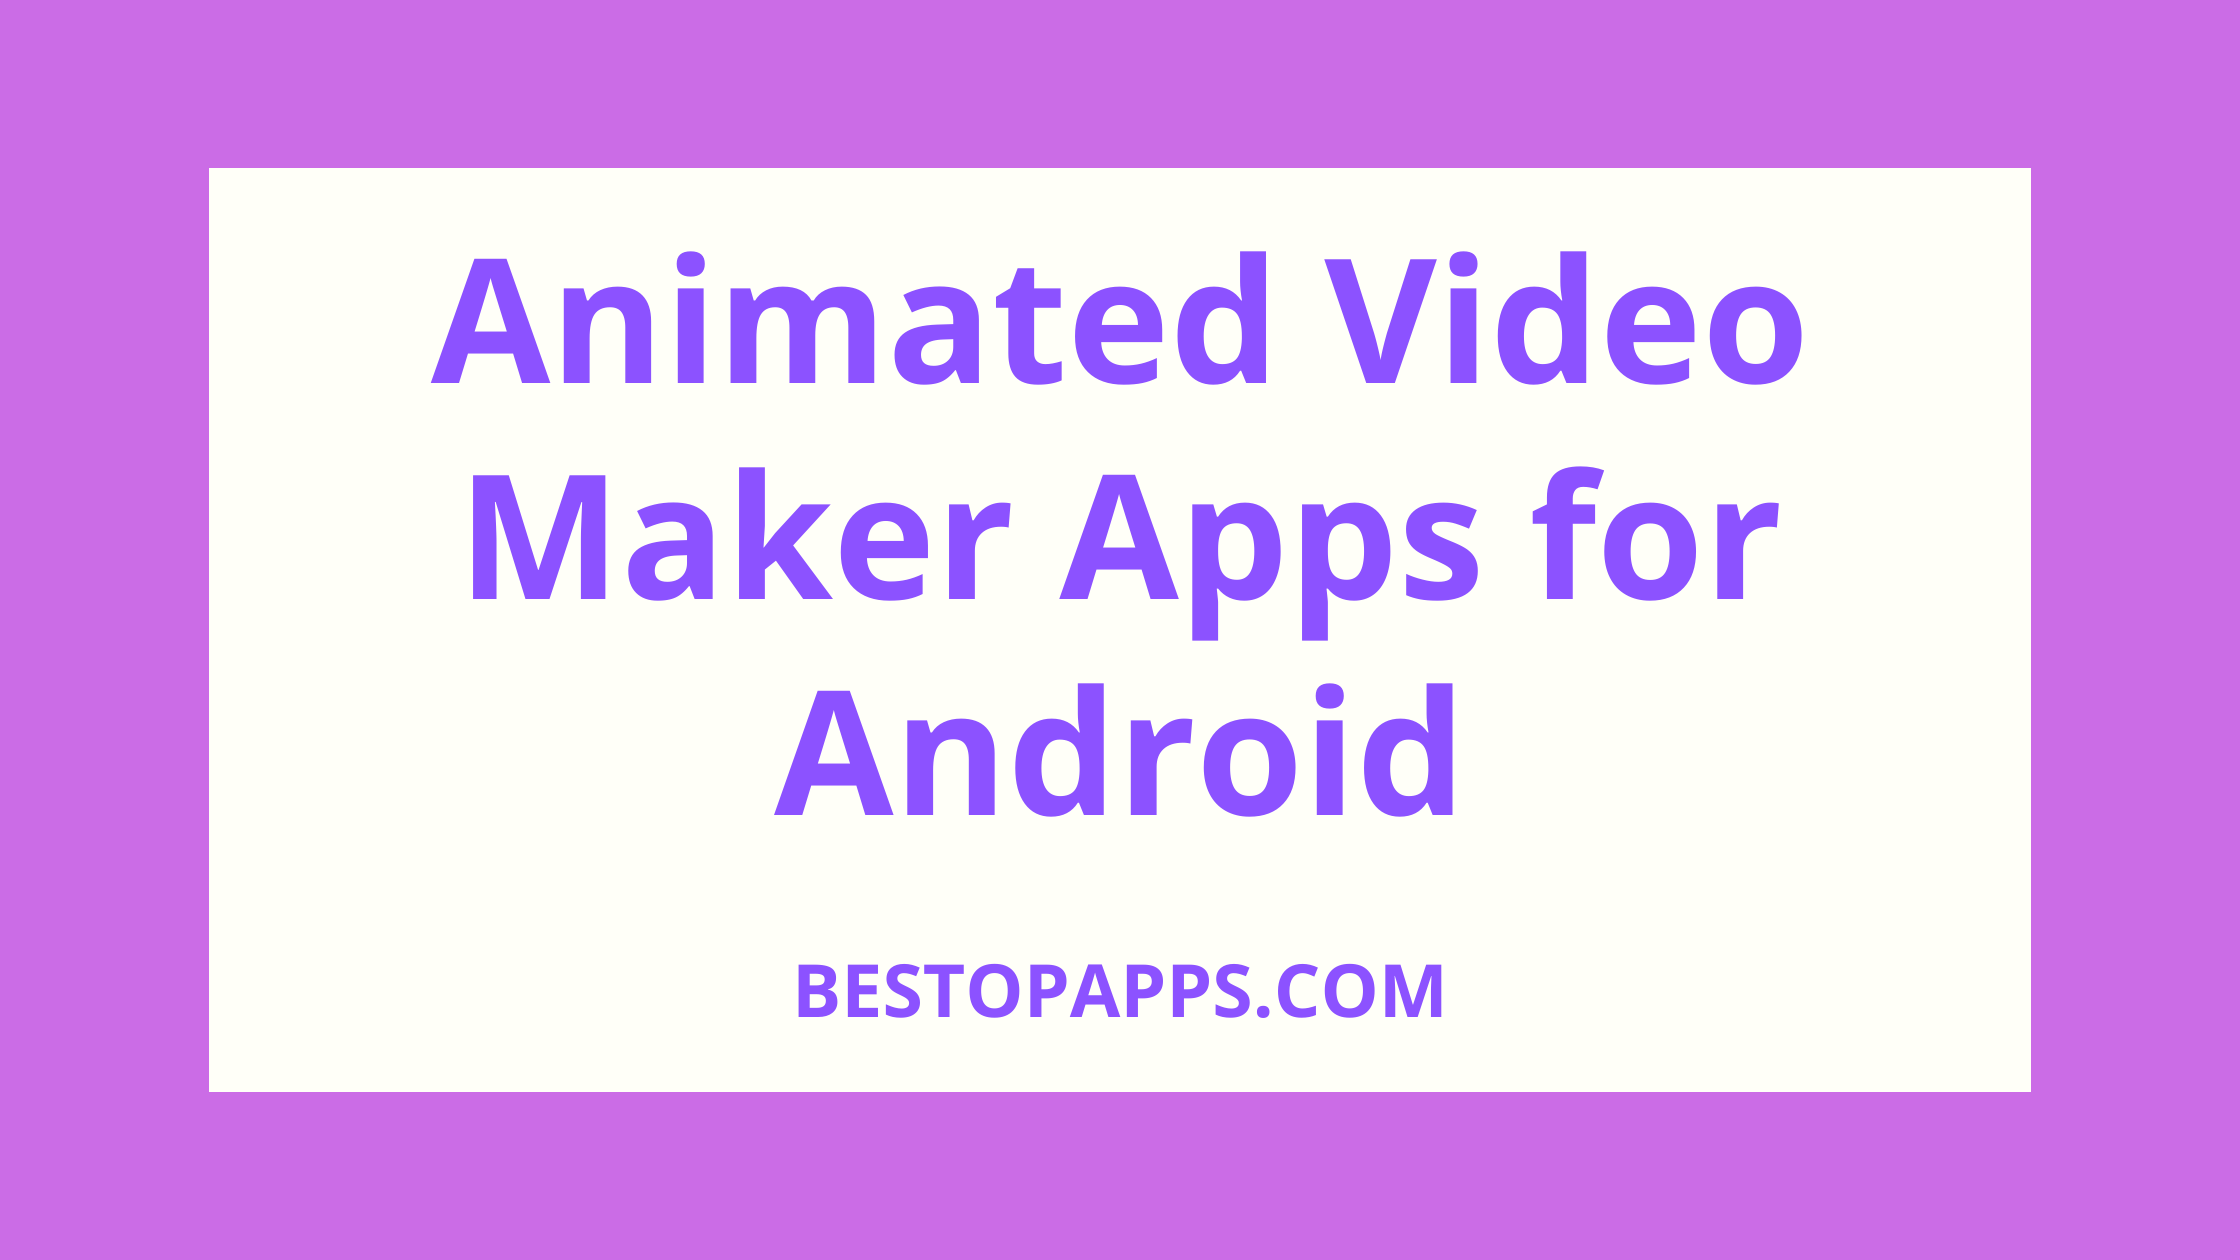 Animated Video Maker Apps for Android